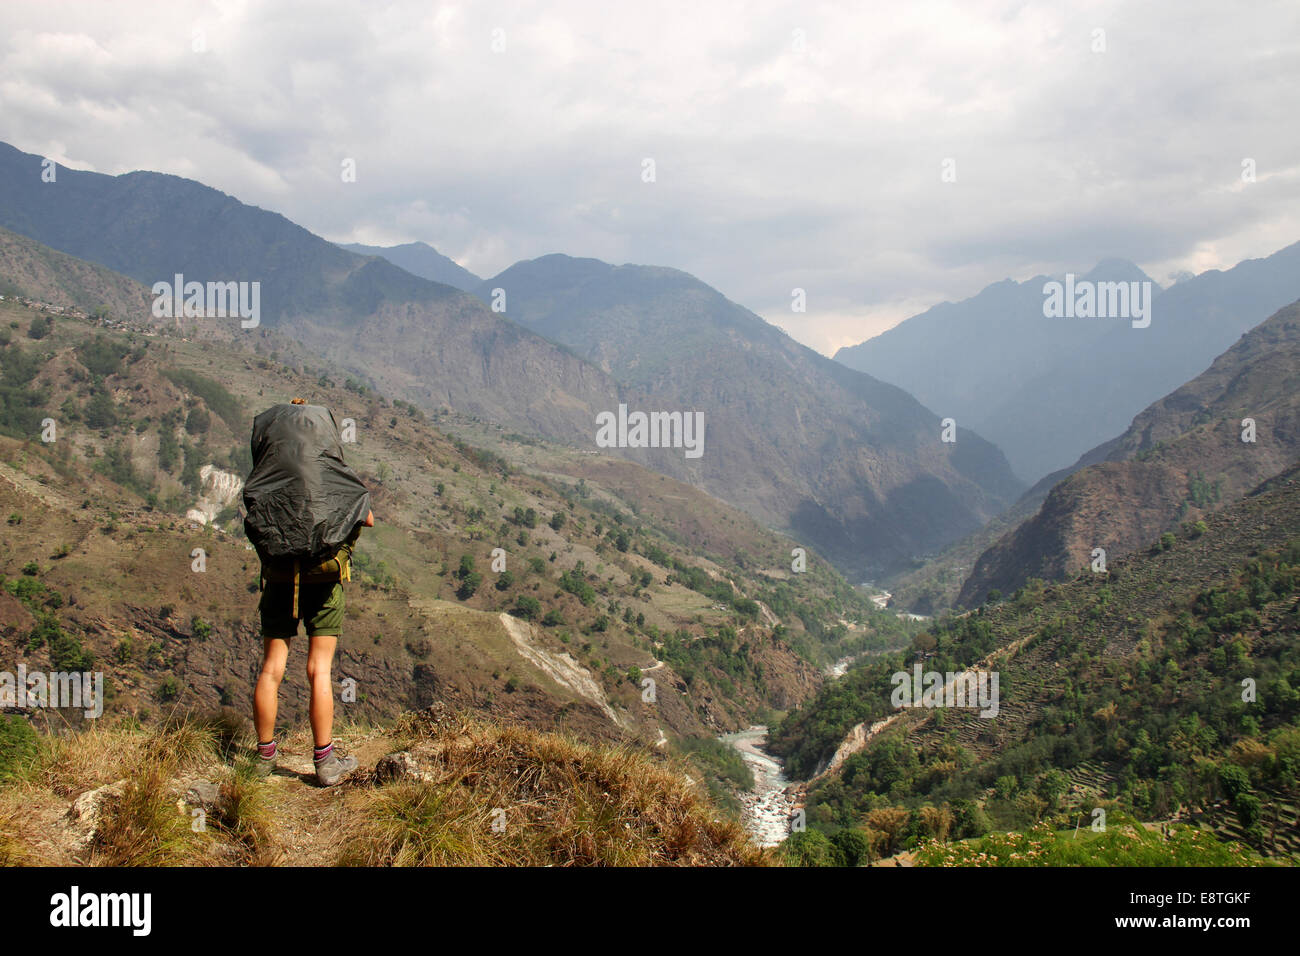 Girl Looks out over Marshyangdi Valley, on Annapurna Circuit, Nepal Stock Photo